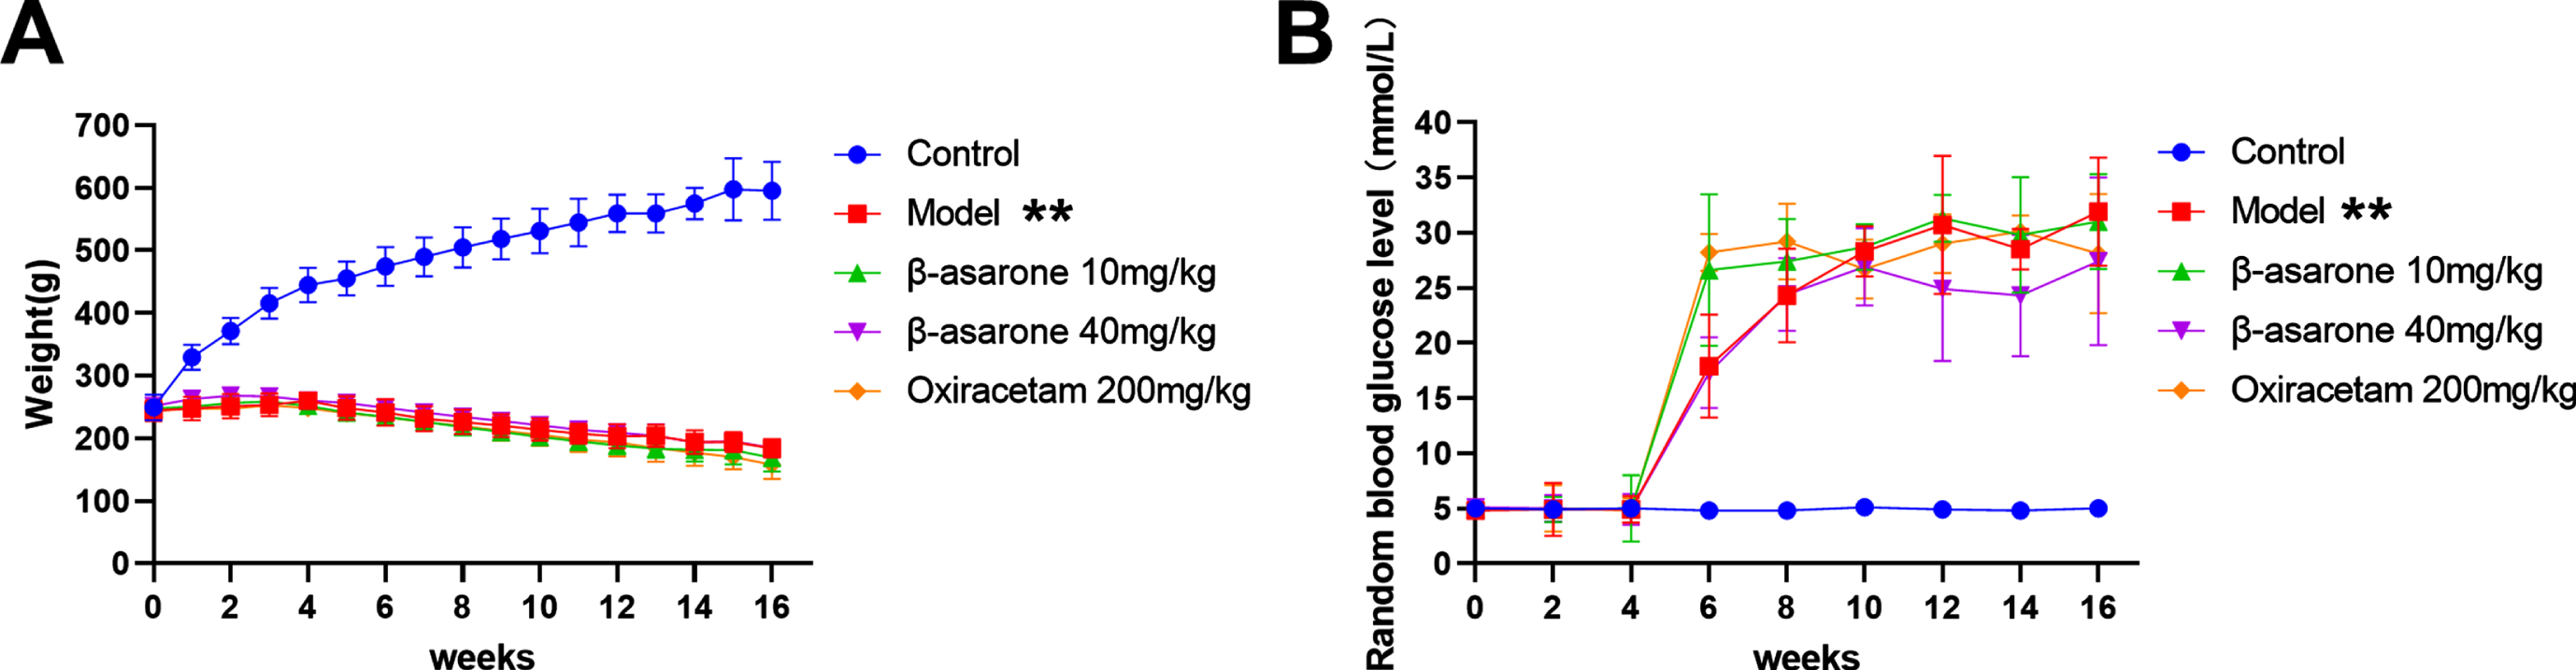 Changes in body weight and blood glucose of DE model rats. Weights (A), random blood glucose level (B). Data was expressed as mean±SD. N = 10. Compared with control group: *p < 0.05, **p < 0.01; compared with Model group: #p < 0.05, # #p < 0.01.